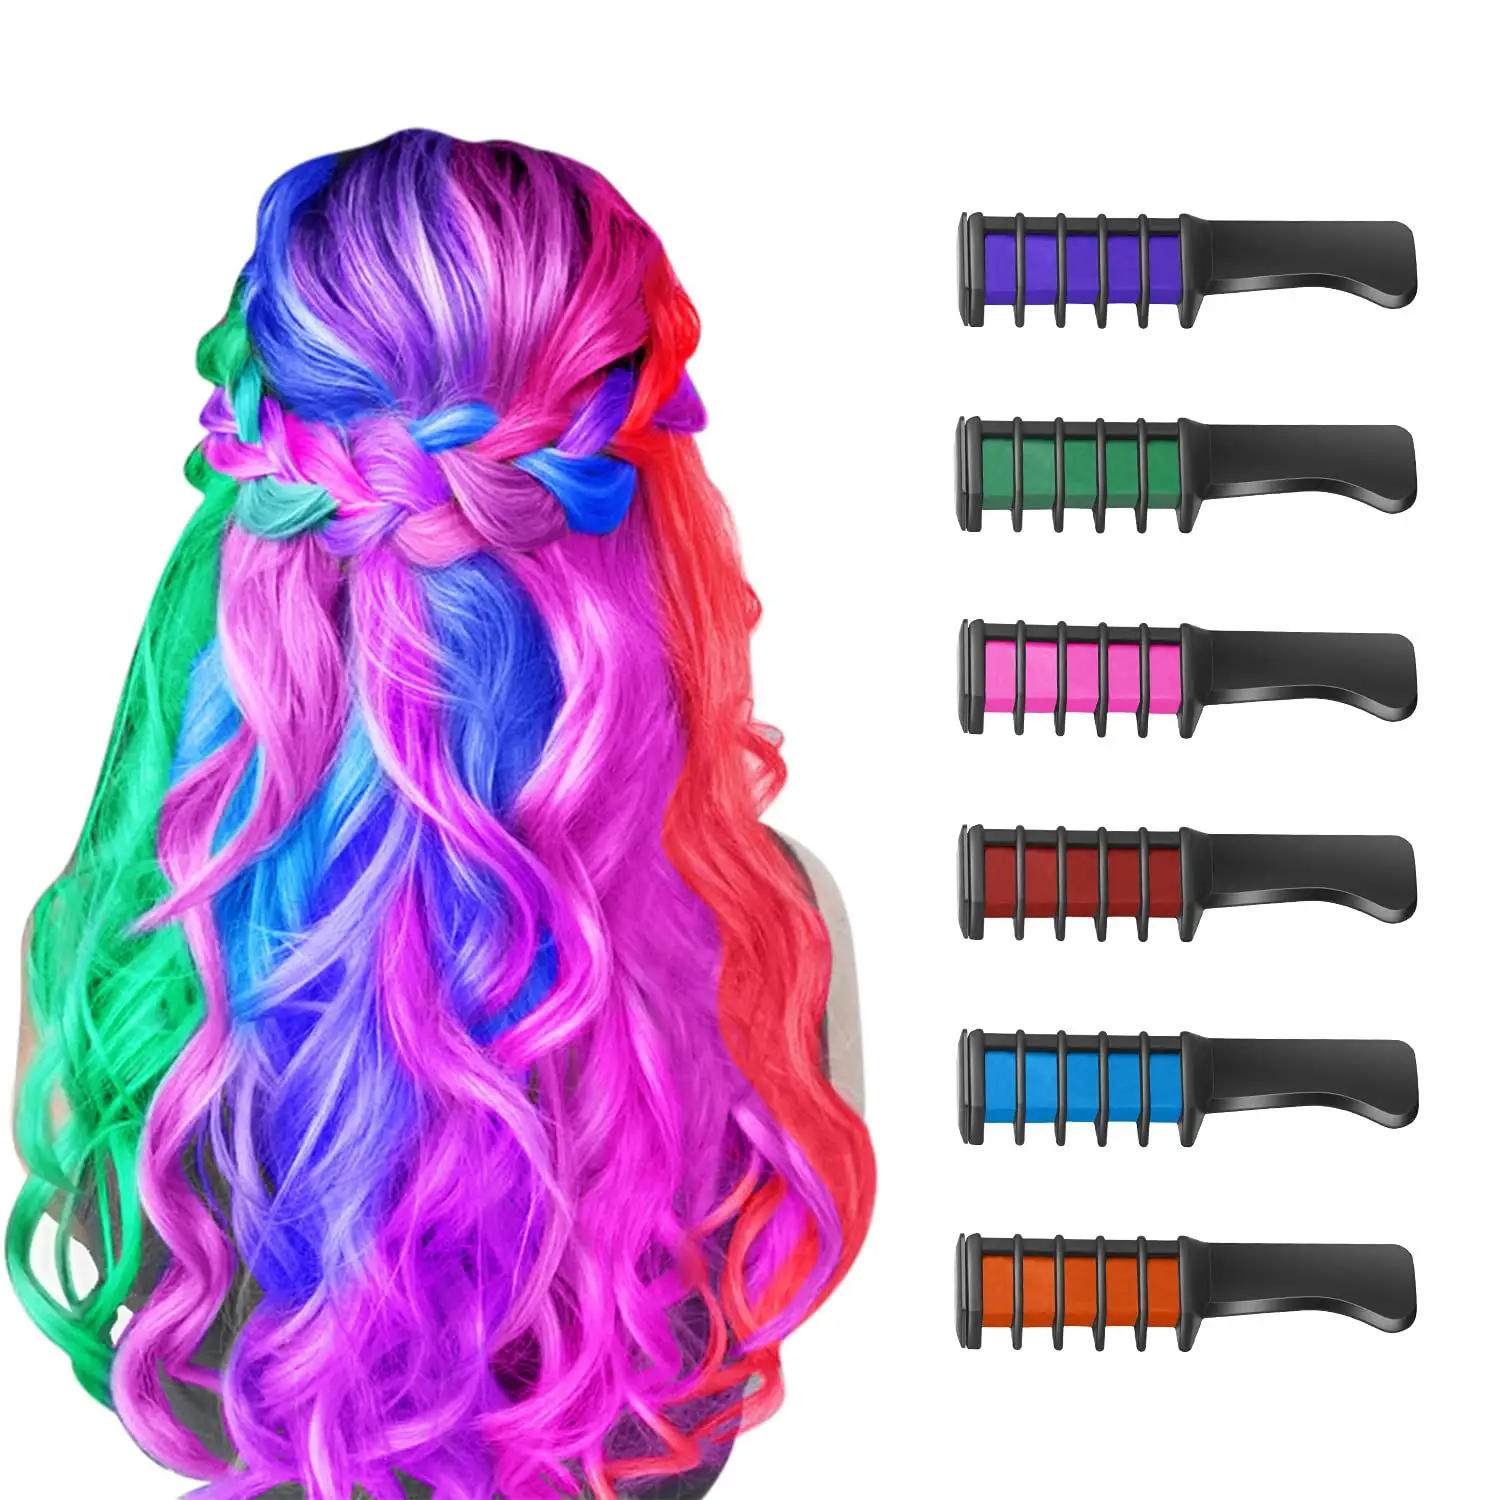 Temporary Hair Chalk Comb-Non Toxic Washable Hair Color Comb for Hair Dye-Safe for Kids for Party Cosplay DIY (6 Colors)